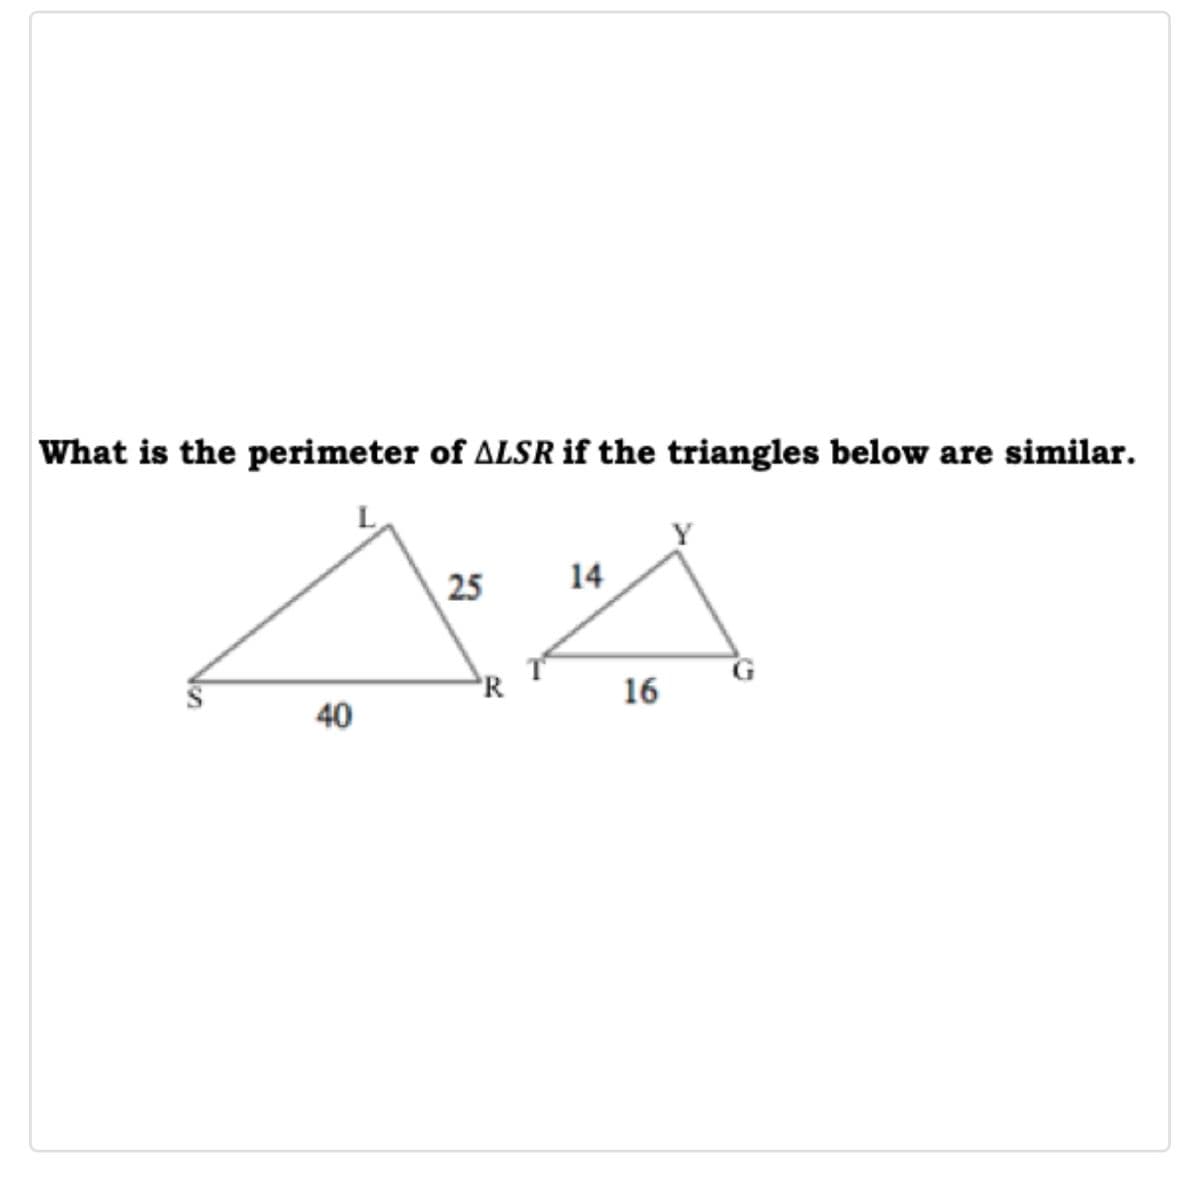 What is the perimeter of ALSR if the triangles below are similar.
25
14
'R
16
40
